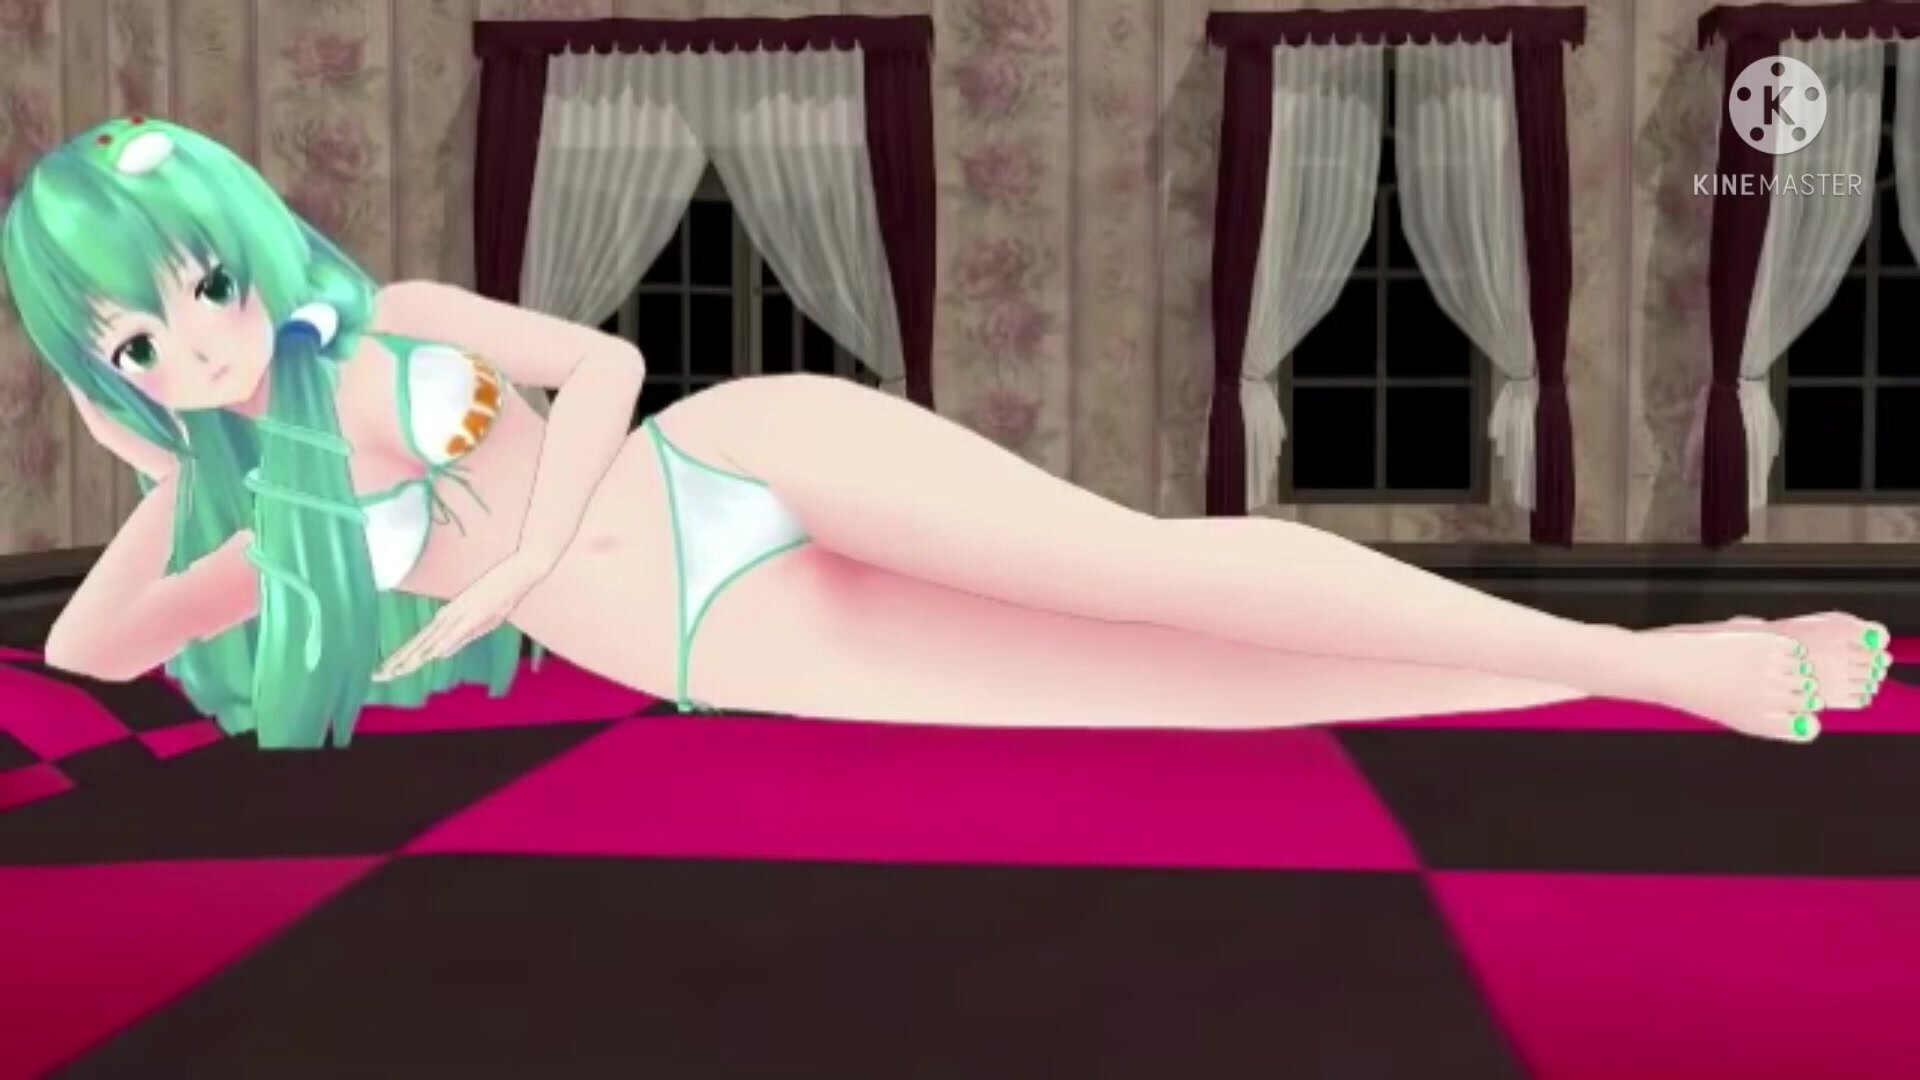 Girls farting animations comp. 2